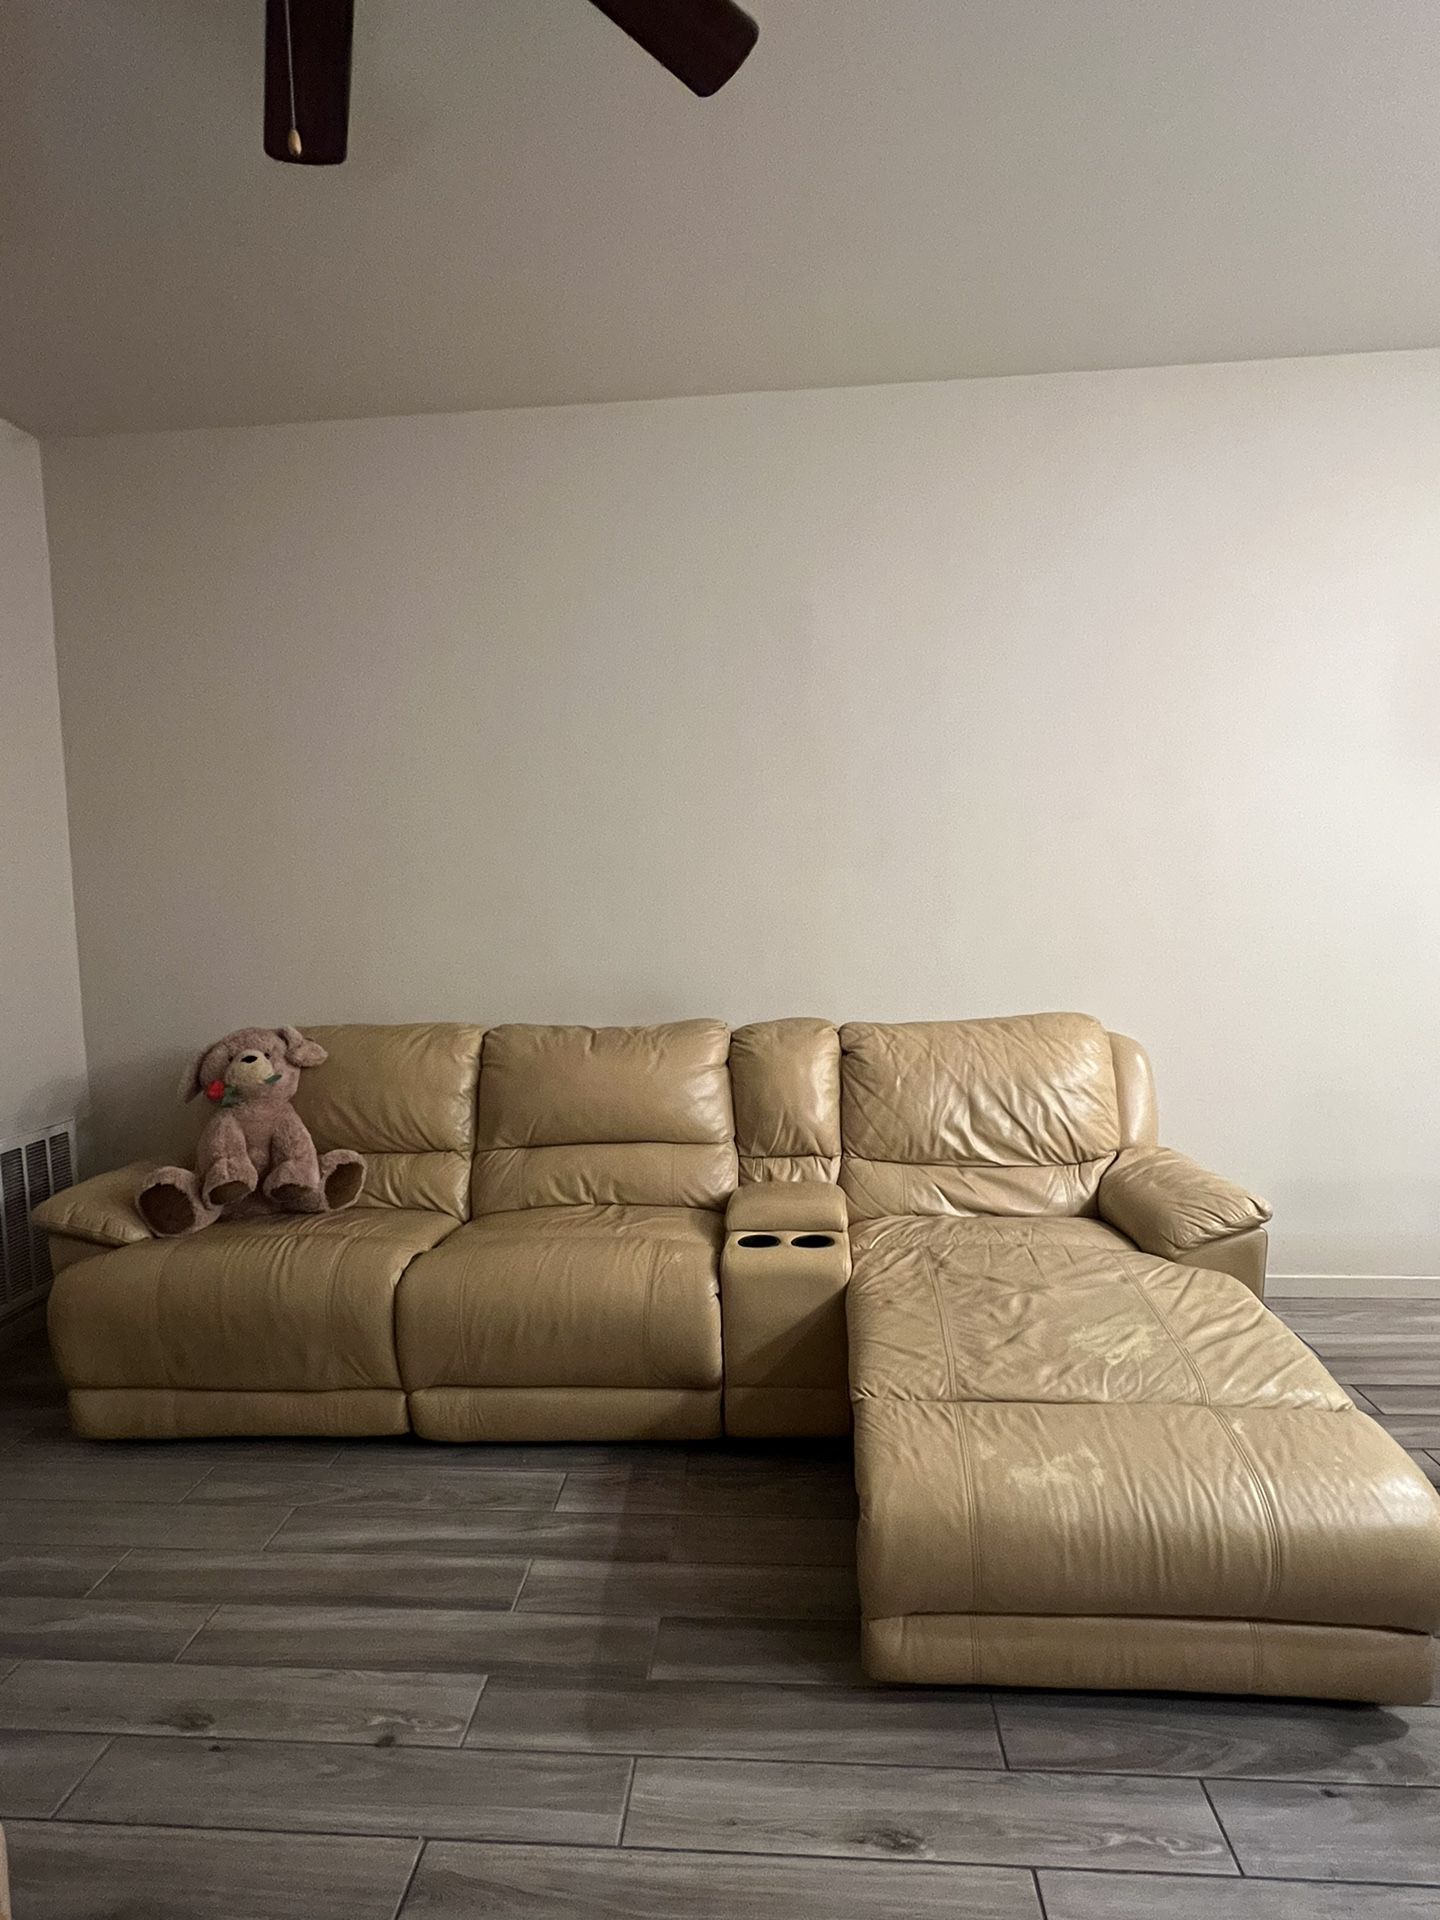 Large Tan Couch